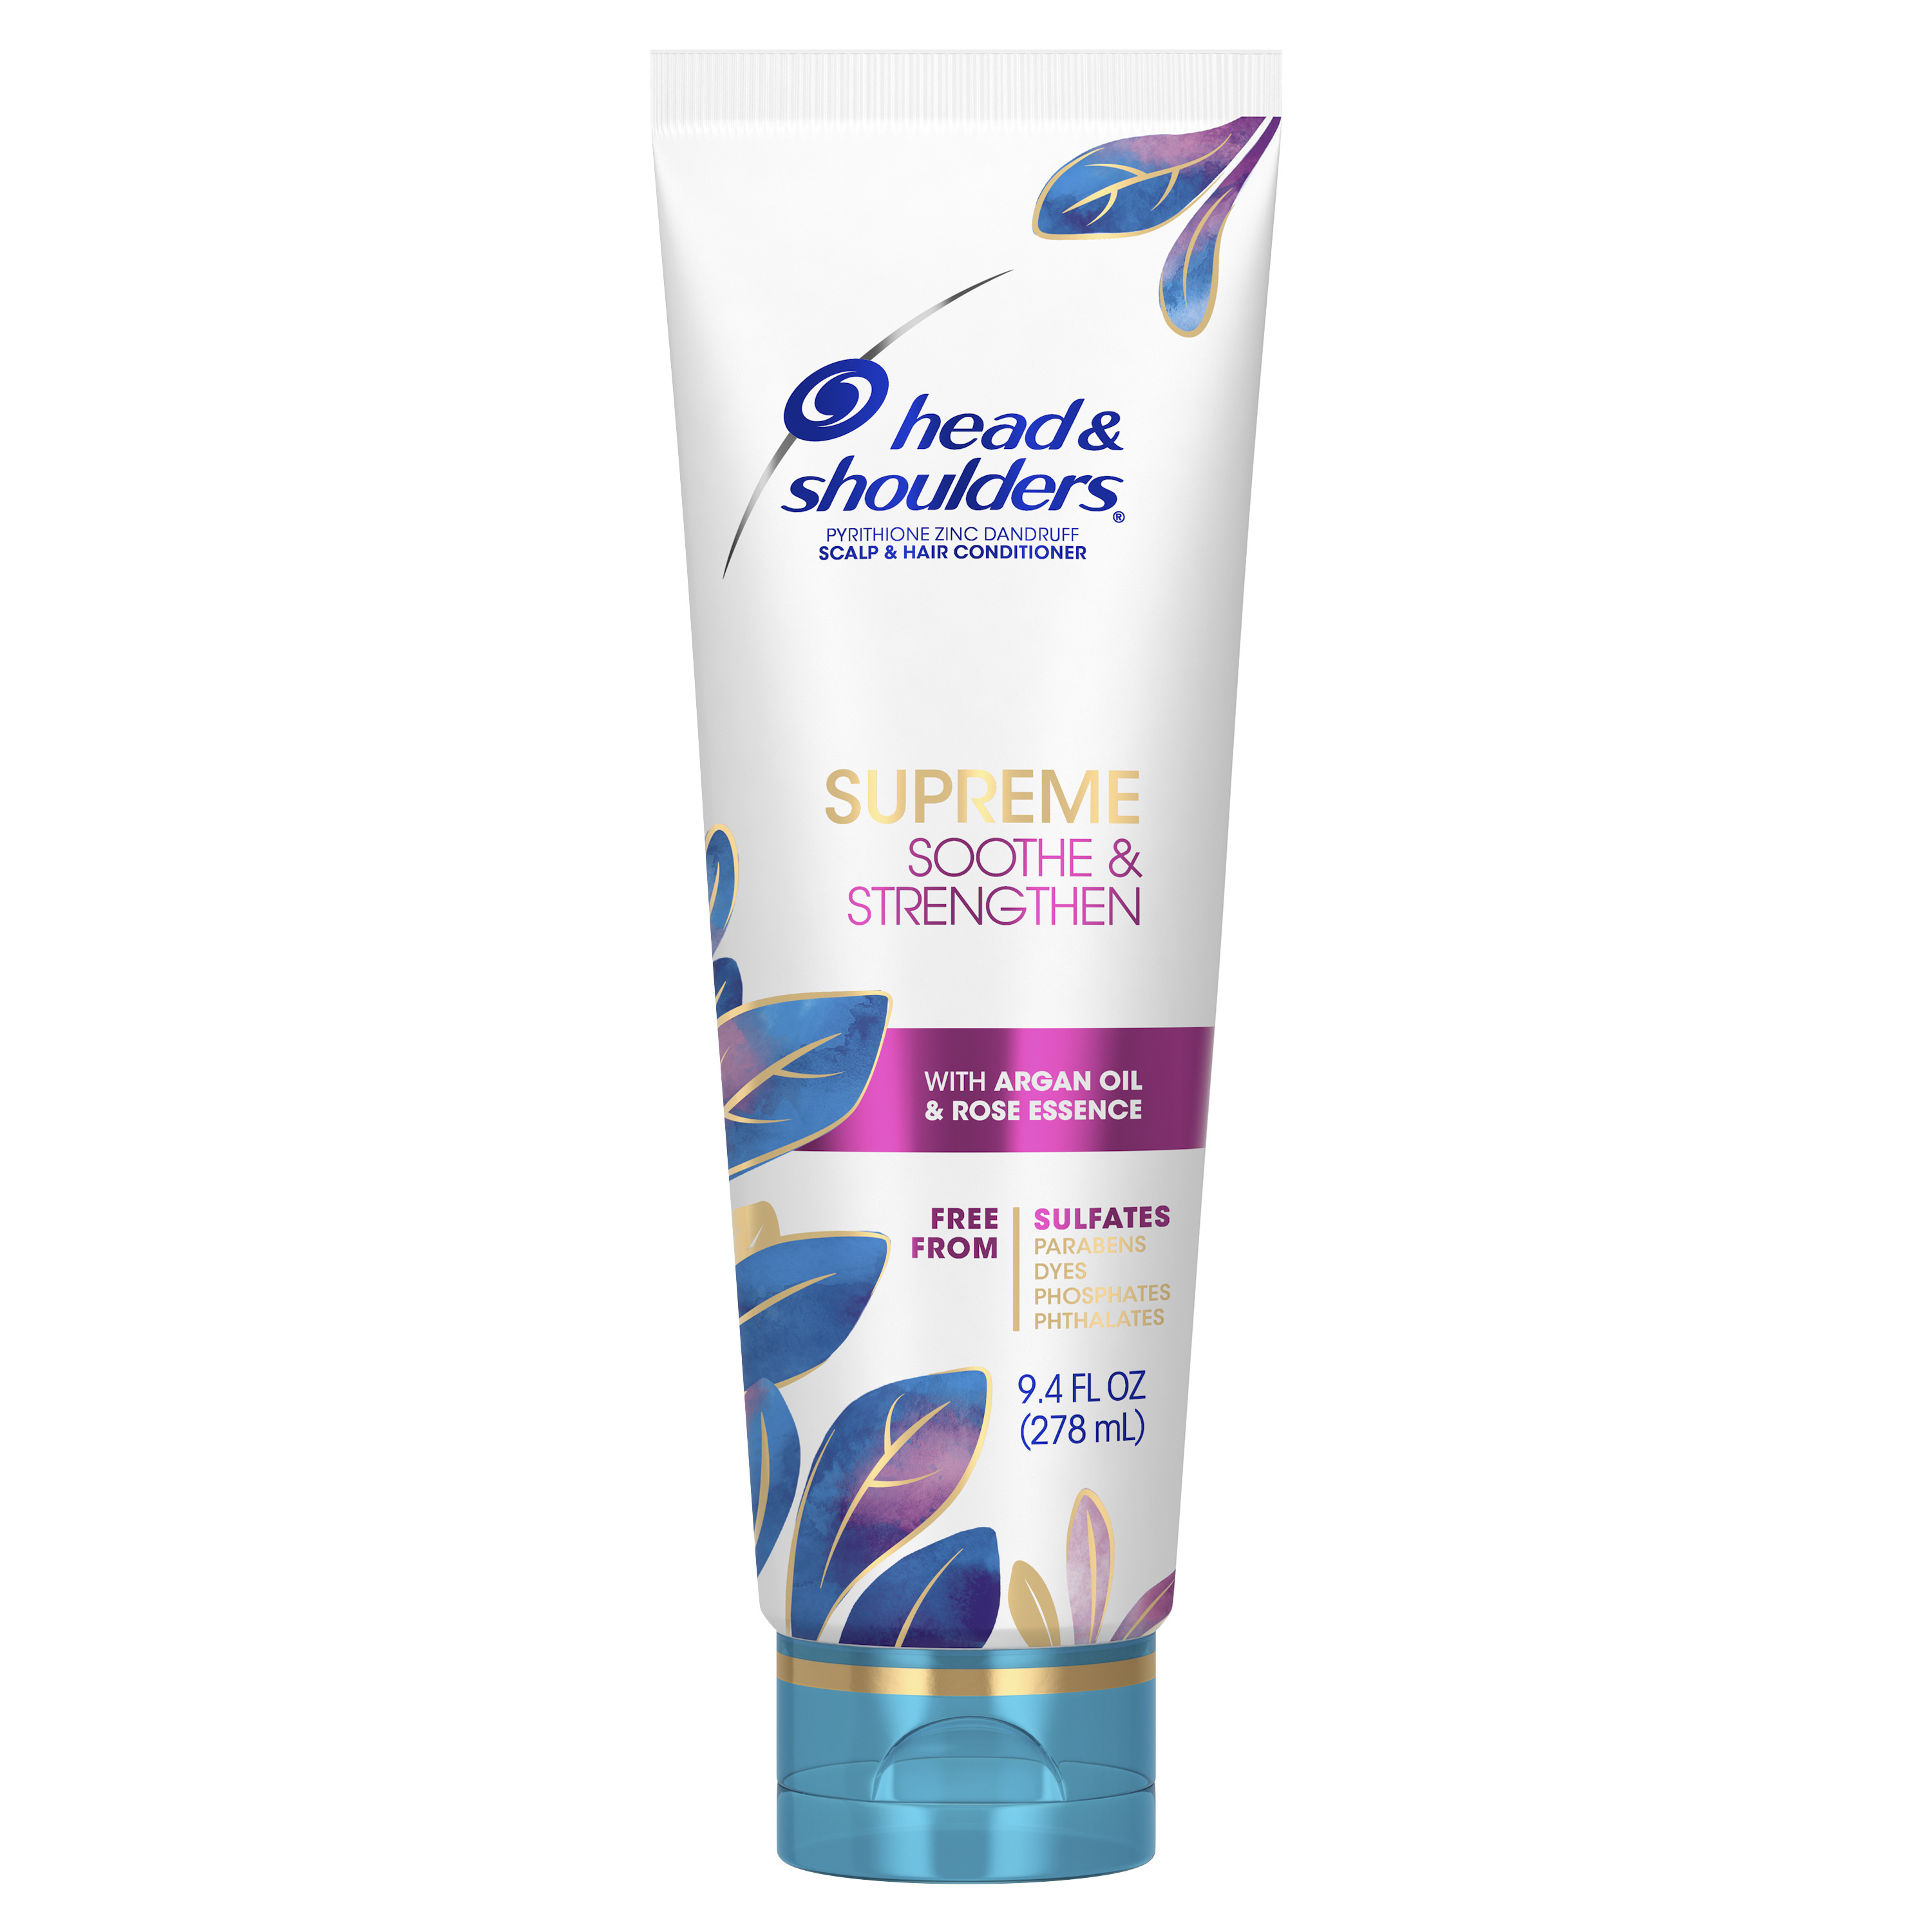 Head & Shoulders Supreme Conditioner, Soothe and Strengthen, All Hair Types, 9.4 fl oz - image 2 of 9